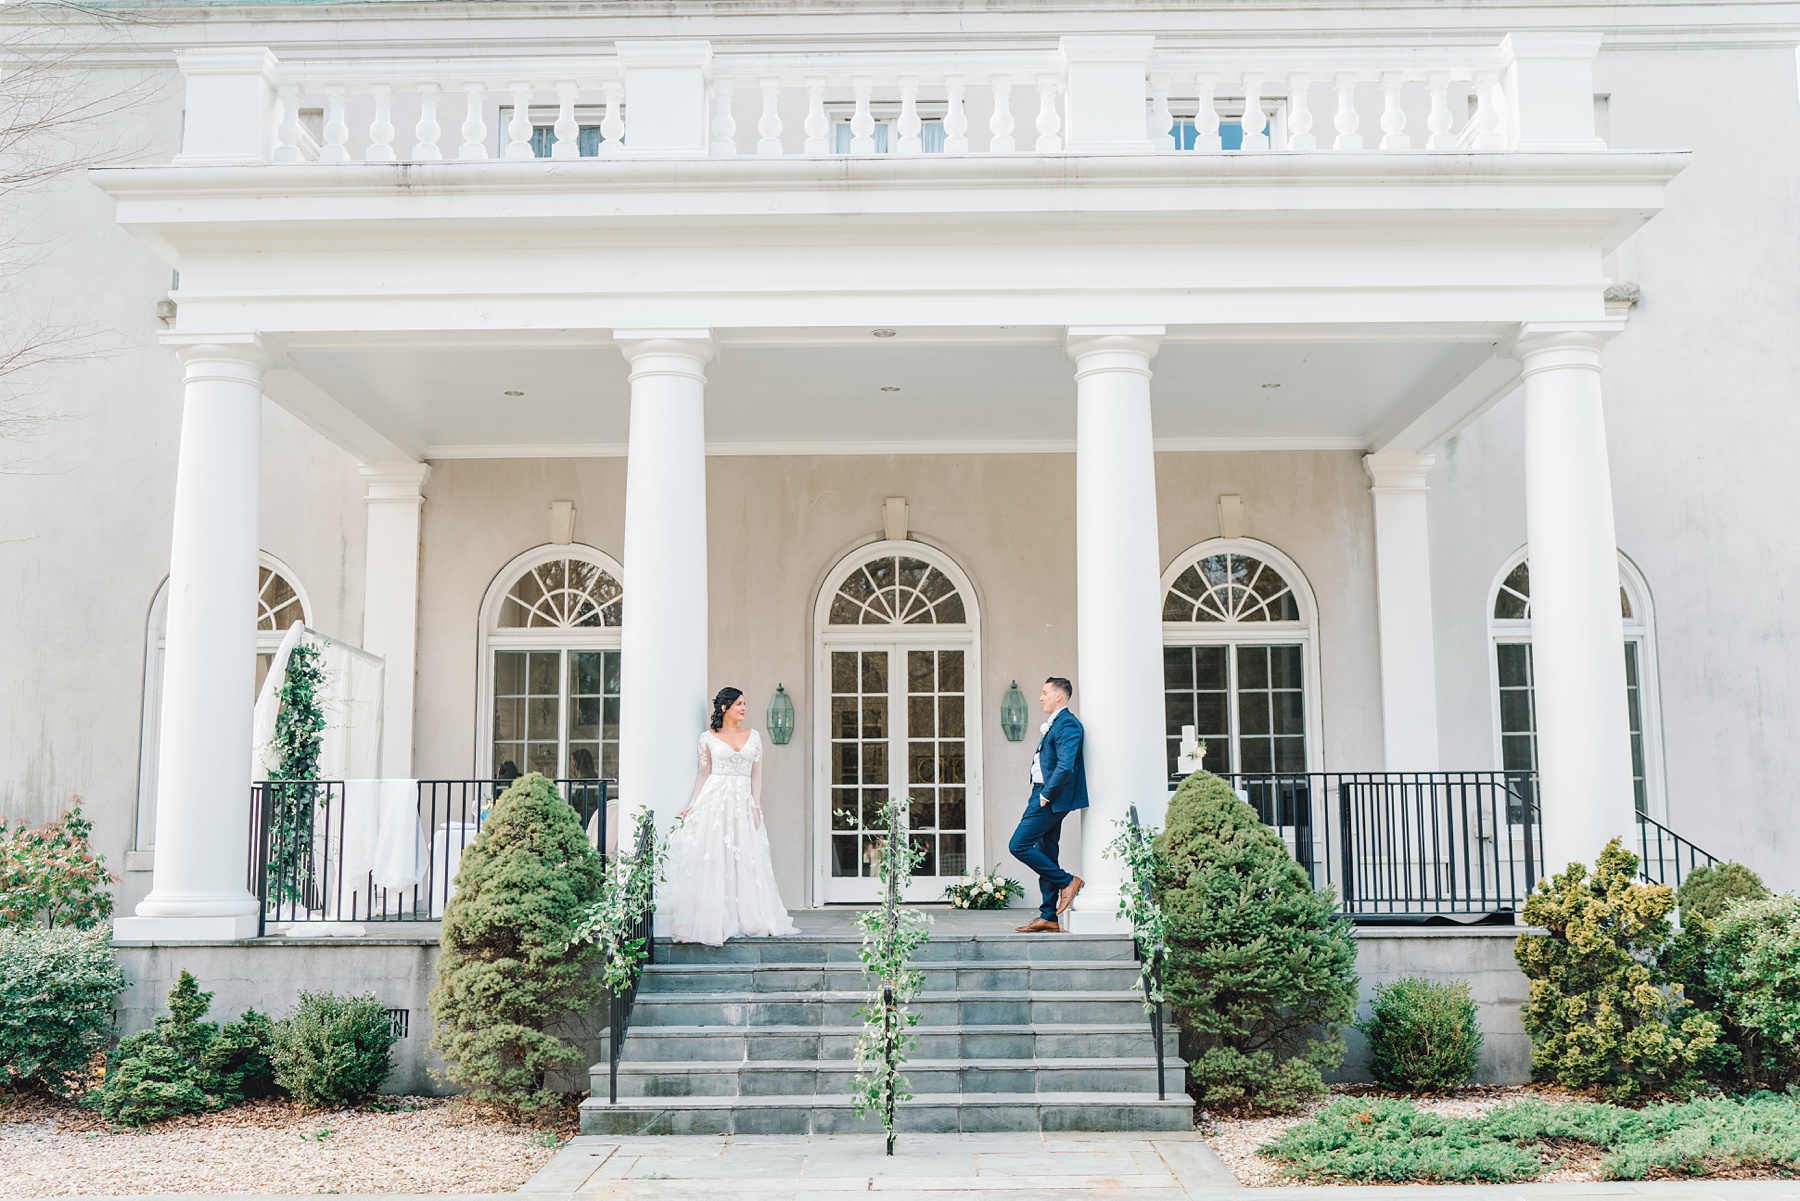 Couple standing in front of Strong Mansion in Maryland